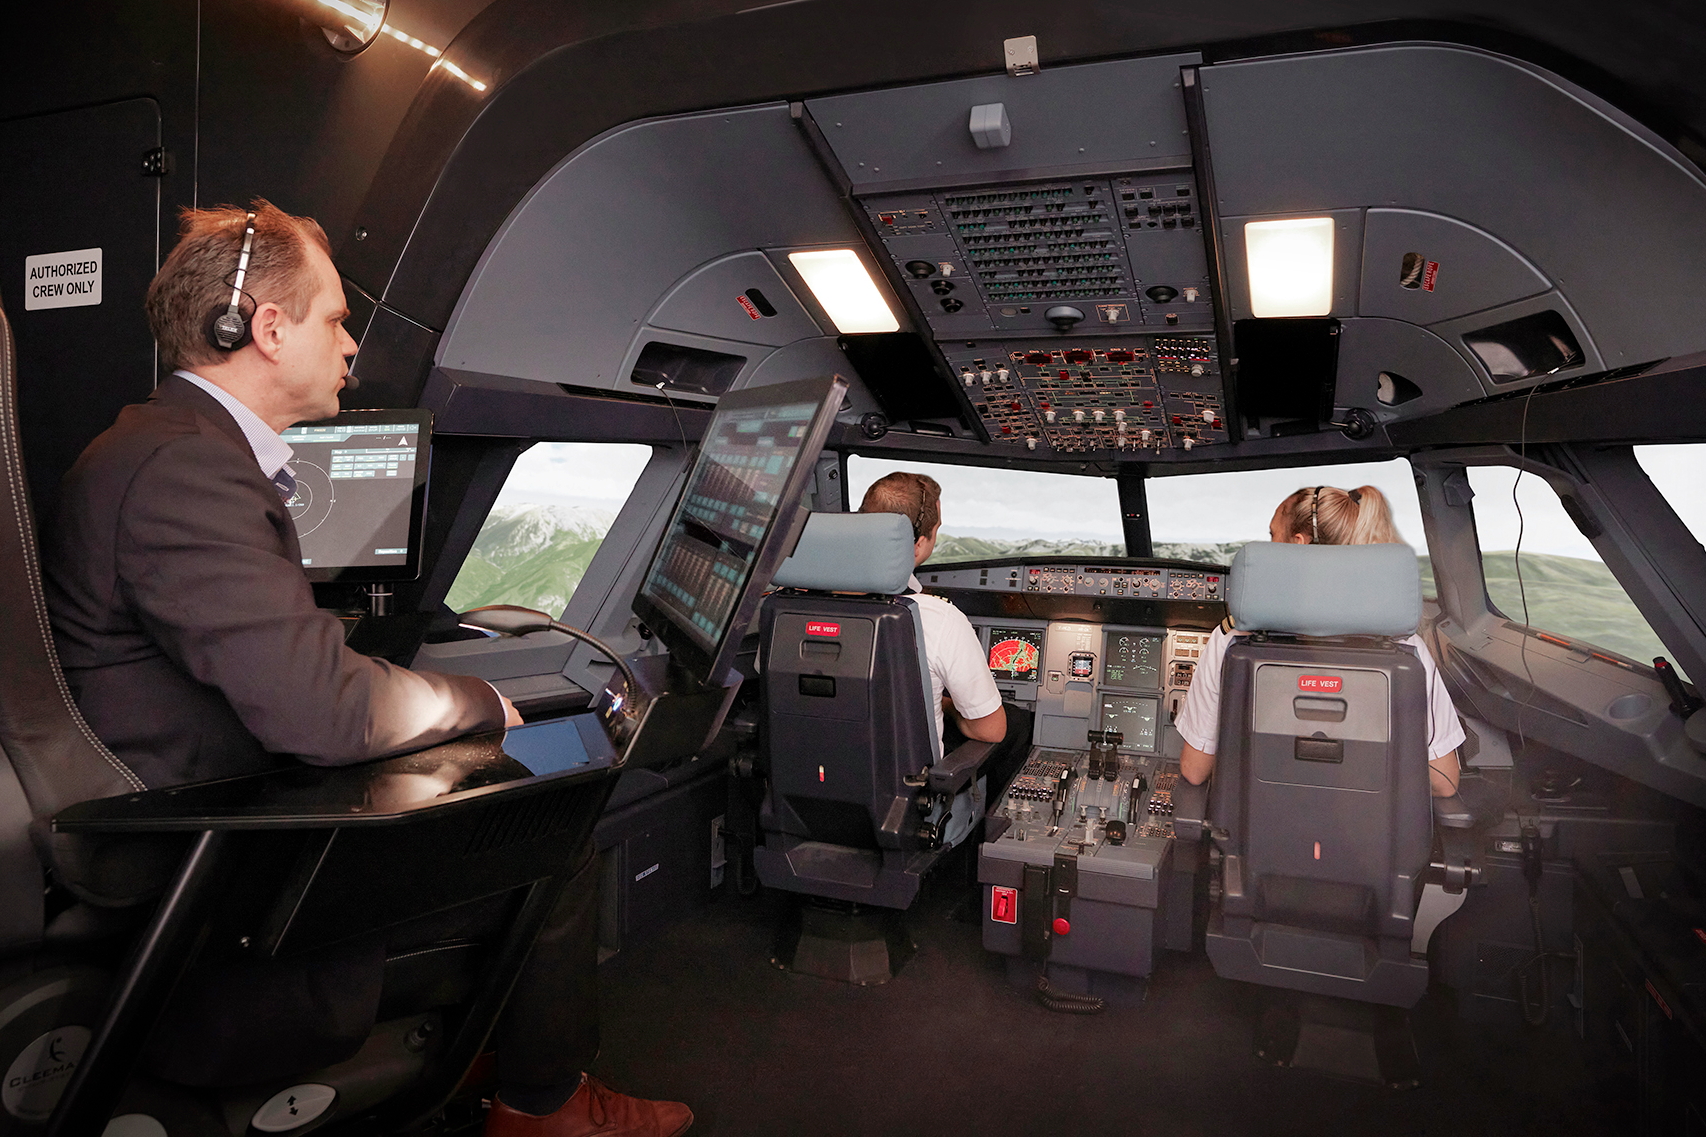 Wizz Air will use the Avion A320 Level D Full Flight Simulator based at London Luton Airport in England. Click to enlarge.